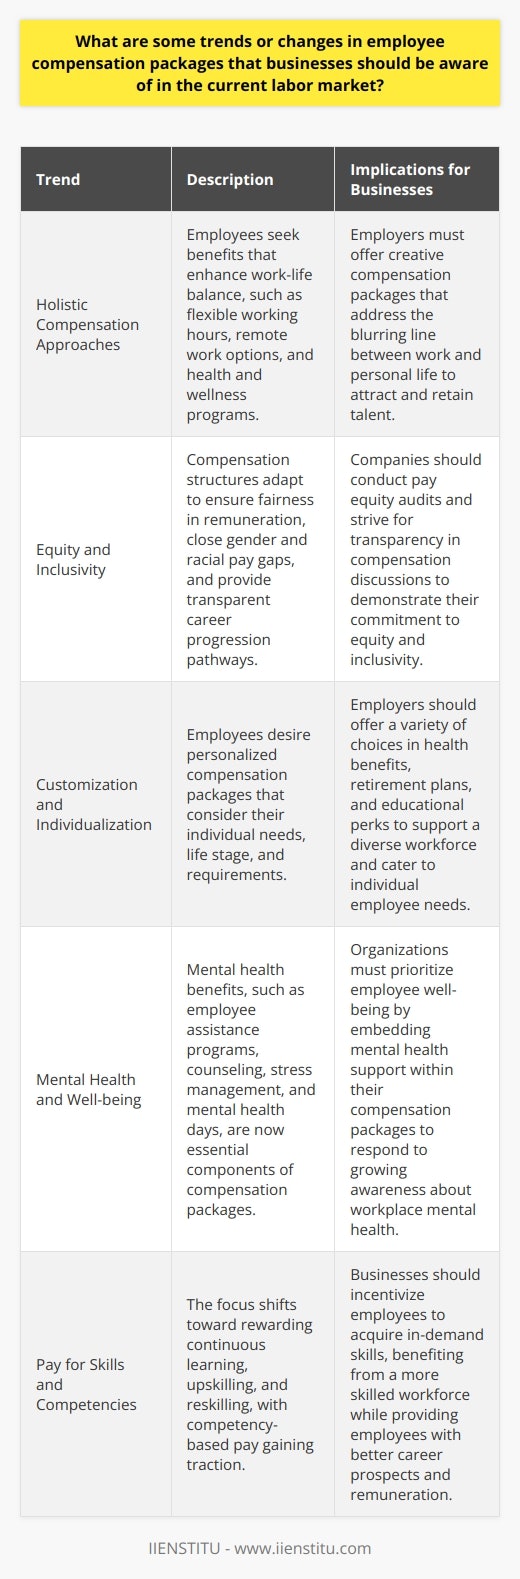 Current Trends in Employee Compensation Employers must stay abreast of the evolving labor market. Compensation strategies reflect broader societal shifts. They also align with employee expectations. This dynamic landscape demands agility from businesses. Holistic Compensation Approaches Work-life balance  becomes a priority. Employees seek more than a paycheck. They want benefits that enhance their lives. This shift pushes employers to think holistically. They offer  flexible working hours  and  remote work options . Health and wellness programs gain prominence. The line between work and personal life blurs. Employers address this through creative compensation packages. Equity and Inclusivity Employees increasingly value  equity and inclusivity . Compensation structures adapt. Pay equity audits are on the rise. They ensure fairness in remuneration. Companies strive to close gender and racial pay gaps. Transparent career progression pathways gain importance. They signal equitable growth opportunities. This transparency extends to compensation discussions. Customization and Individualization  One-size-fits-all  no longer applies. Employees desire personalized compensation packages. Employers respond with a variety of choices. These may include diverse health benefits, retirement plans, or educational perks.  Such customization considers individual employee needs. It supports a diverse workforce. Employees can tailor benefits to their specific life stage and requirements. Mental Health and Well-being Employee well-being garners attention. Mental health benefits are no longer a nice-to-have. They are essential. Employers now embed mental health support within compensation packages. Employee assistance programs diversify. They provide counseling, stress management, and mental health days. These offerings respond to growing awareness about workplace mental health. Pay for Skills and Competencies The focus shifts toward skills and competencies. Organizations reward continuous learning. Upskilling and reskilling become essential. The market compensates for emerging skills. Competency-based pay gains traction. It incentivizes employees to acquire in-demand skills. Employers benefit from a more skilled workforce. Employees benefit from better career prospects and remuneration. Sustainability and Purpose Many employees align with sustainable and ethical practices. They favor employers with strong corporate social responsibility (CSR) programs. CSR efforts can affect compensation strategies. Companies may introduce incentives linked to sustainable goals. Employees who contribute to CSR initiatives get recognized. This approach resonates with values-oriented workers. Adaptability in compensation packages is crucial. Employers face a labor market in flux. Employee preferences drive change in compensation. Employers must embrace these evolving trends. They ensure their compensation packages remain competitive. They also attract and retain top talent in a challenging environment.